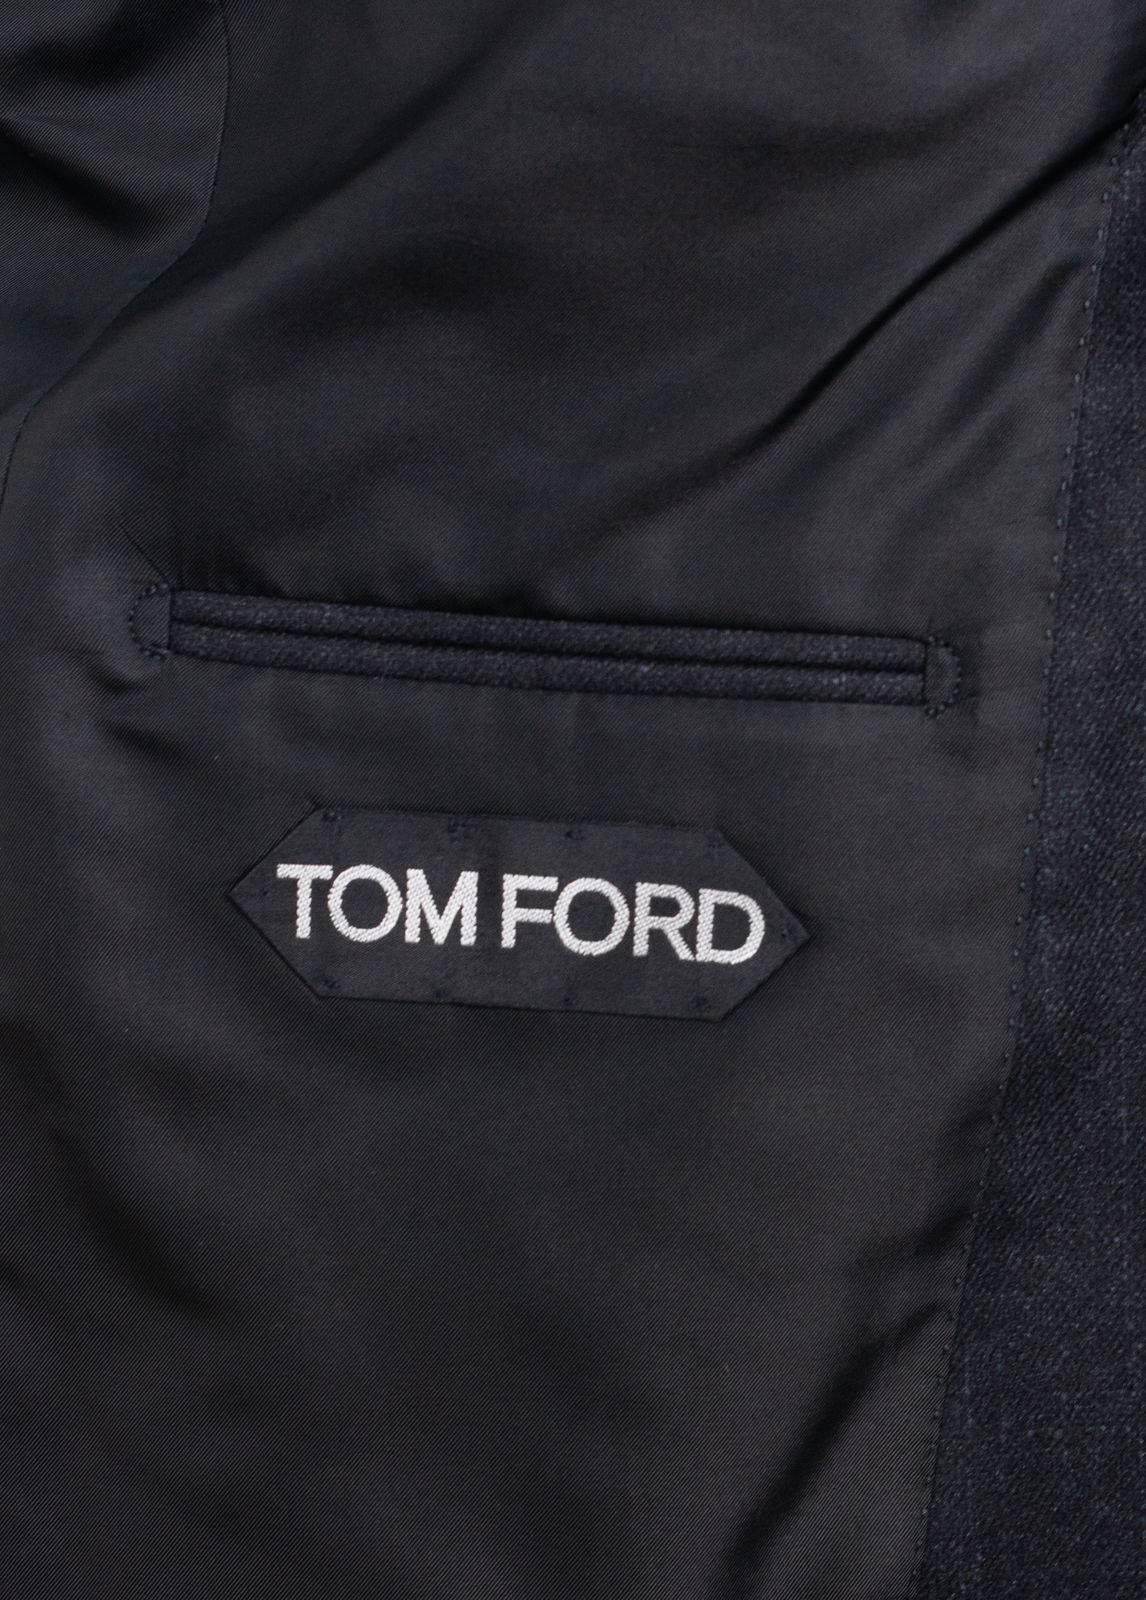 TOM FORD's Shelton base resembles the classic Windsor, an elegant and well-balanced classic fit with inspiration drawn from the end of the 1940s to the beginning of the 1950sShelton Peak Lapels Sports Jacket. The Unique style and sports jacket can